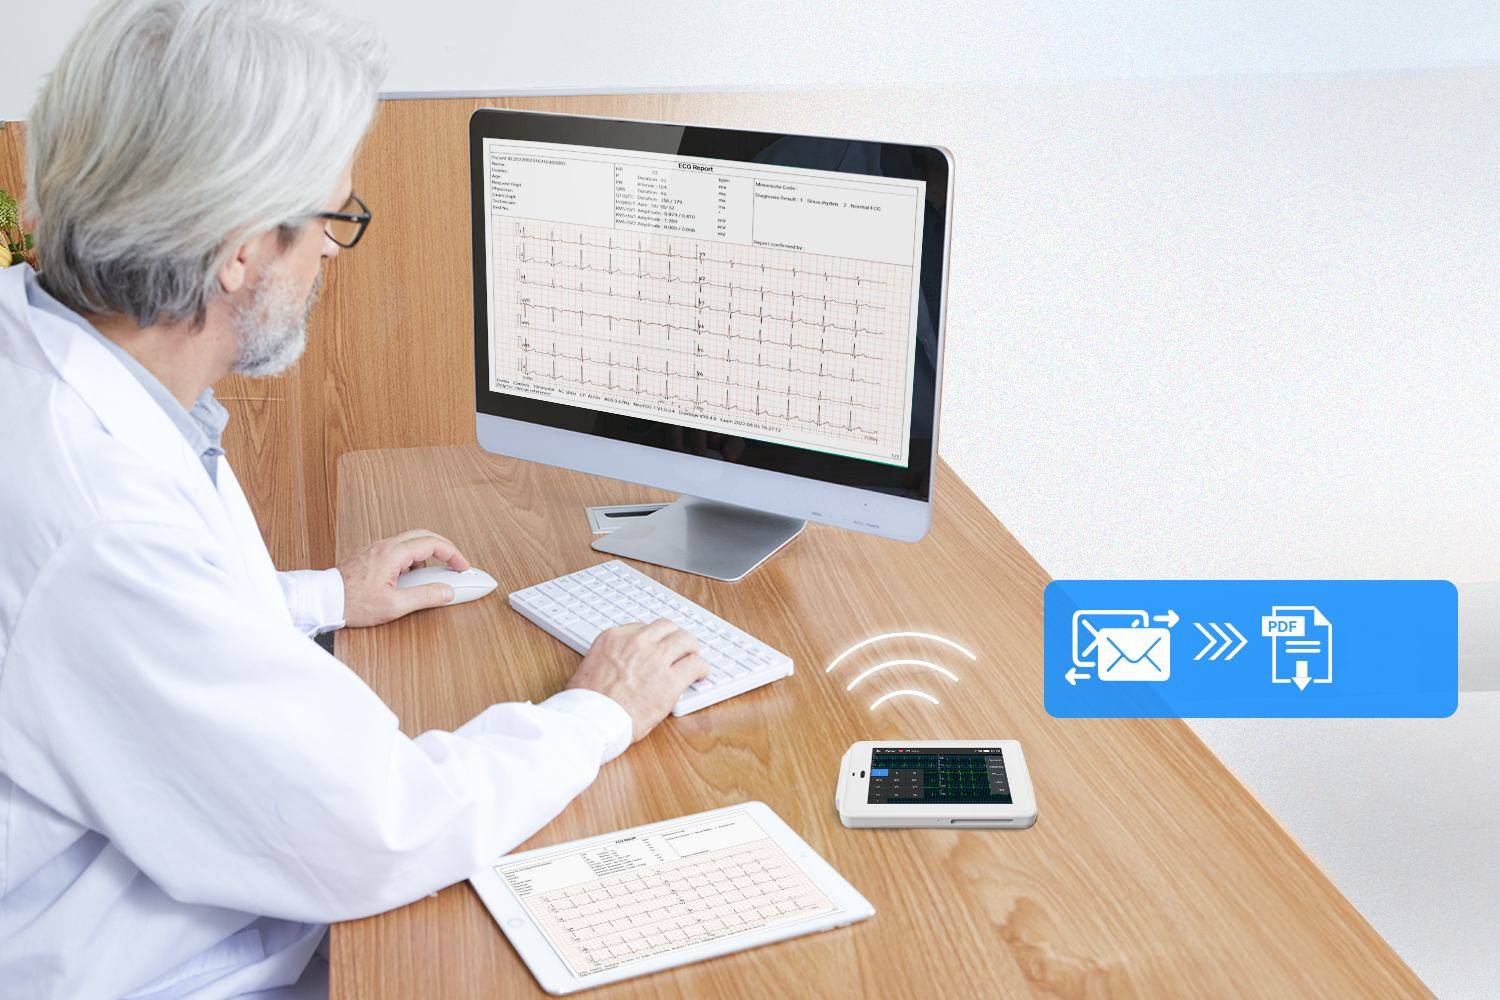 The 12-lead pocket ECG machine allows for wireless data transfer via email.